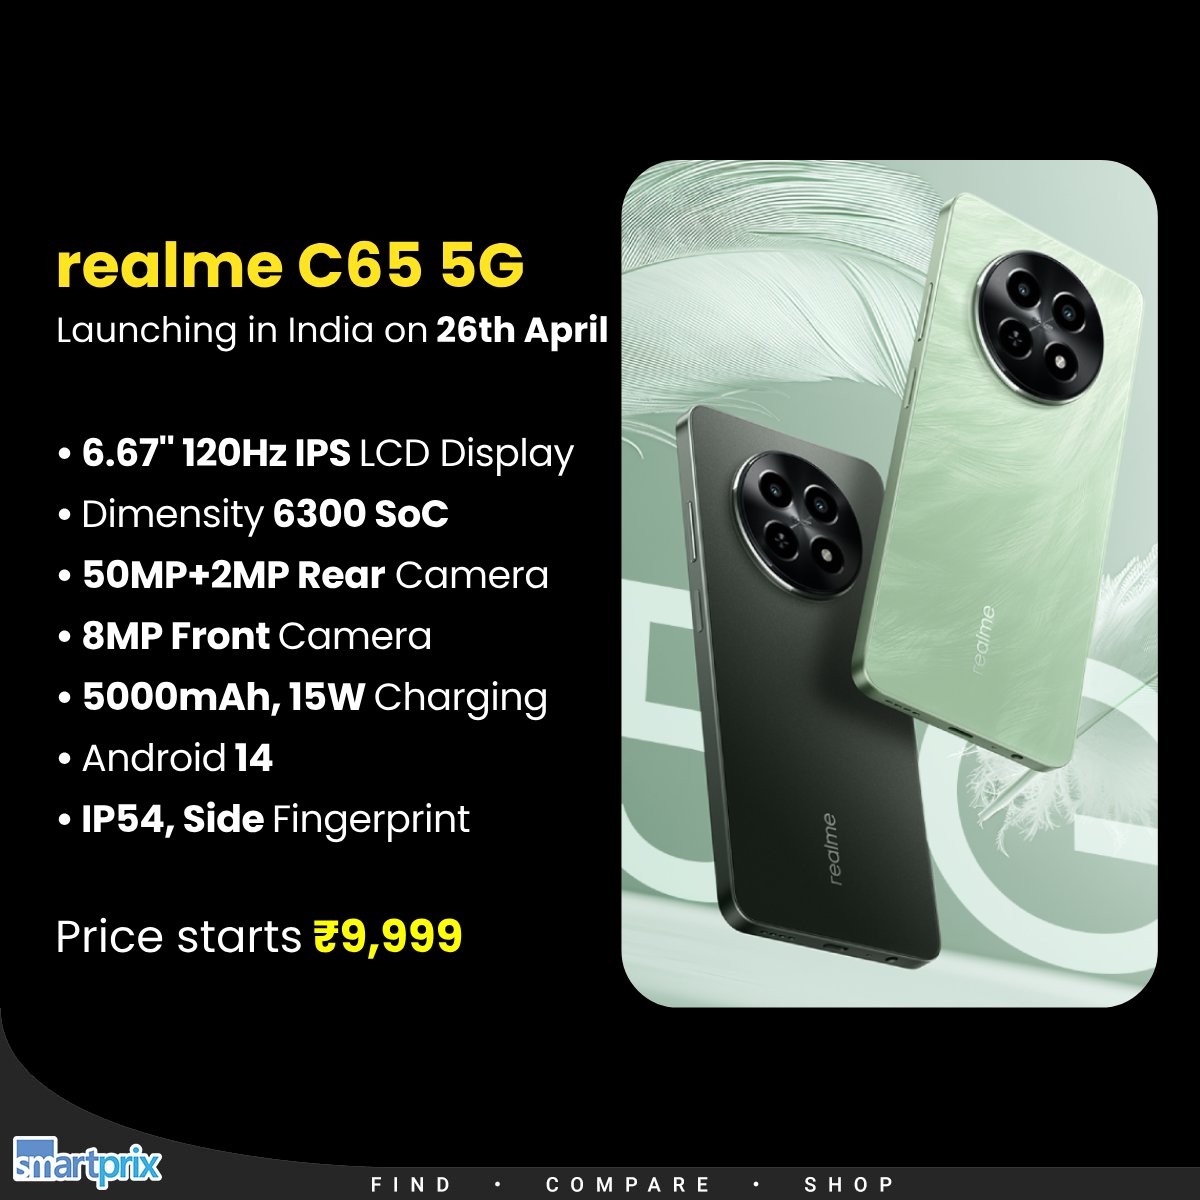 Another Realme smartphone set to debut this week: Realme C65 5G, arriving on April 26th #realme #realmeC655G